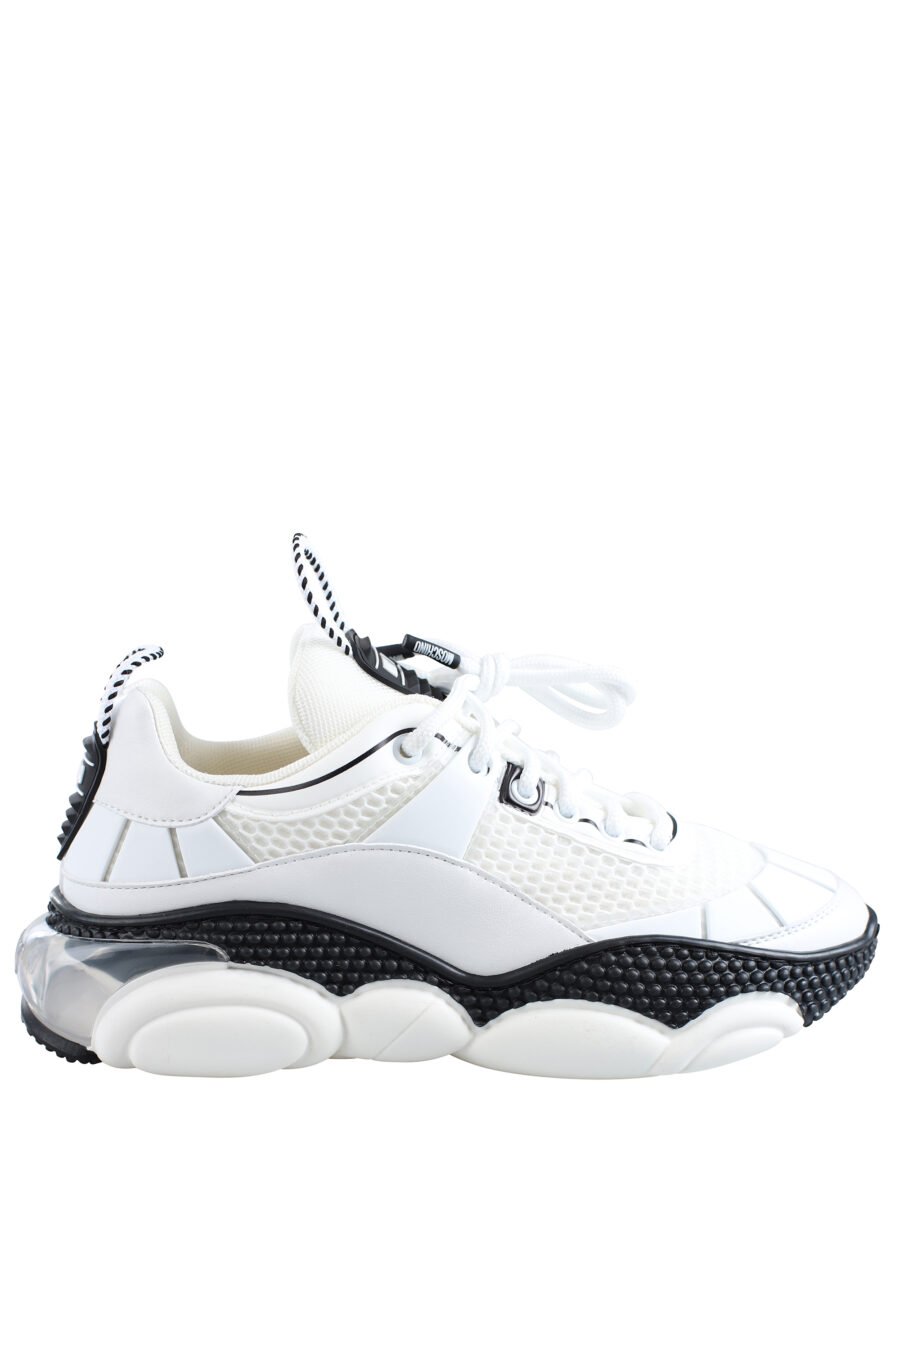 Trainers white with black mesh "bolla35" - IMG 1956